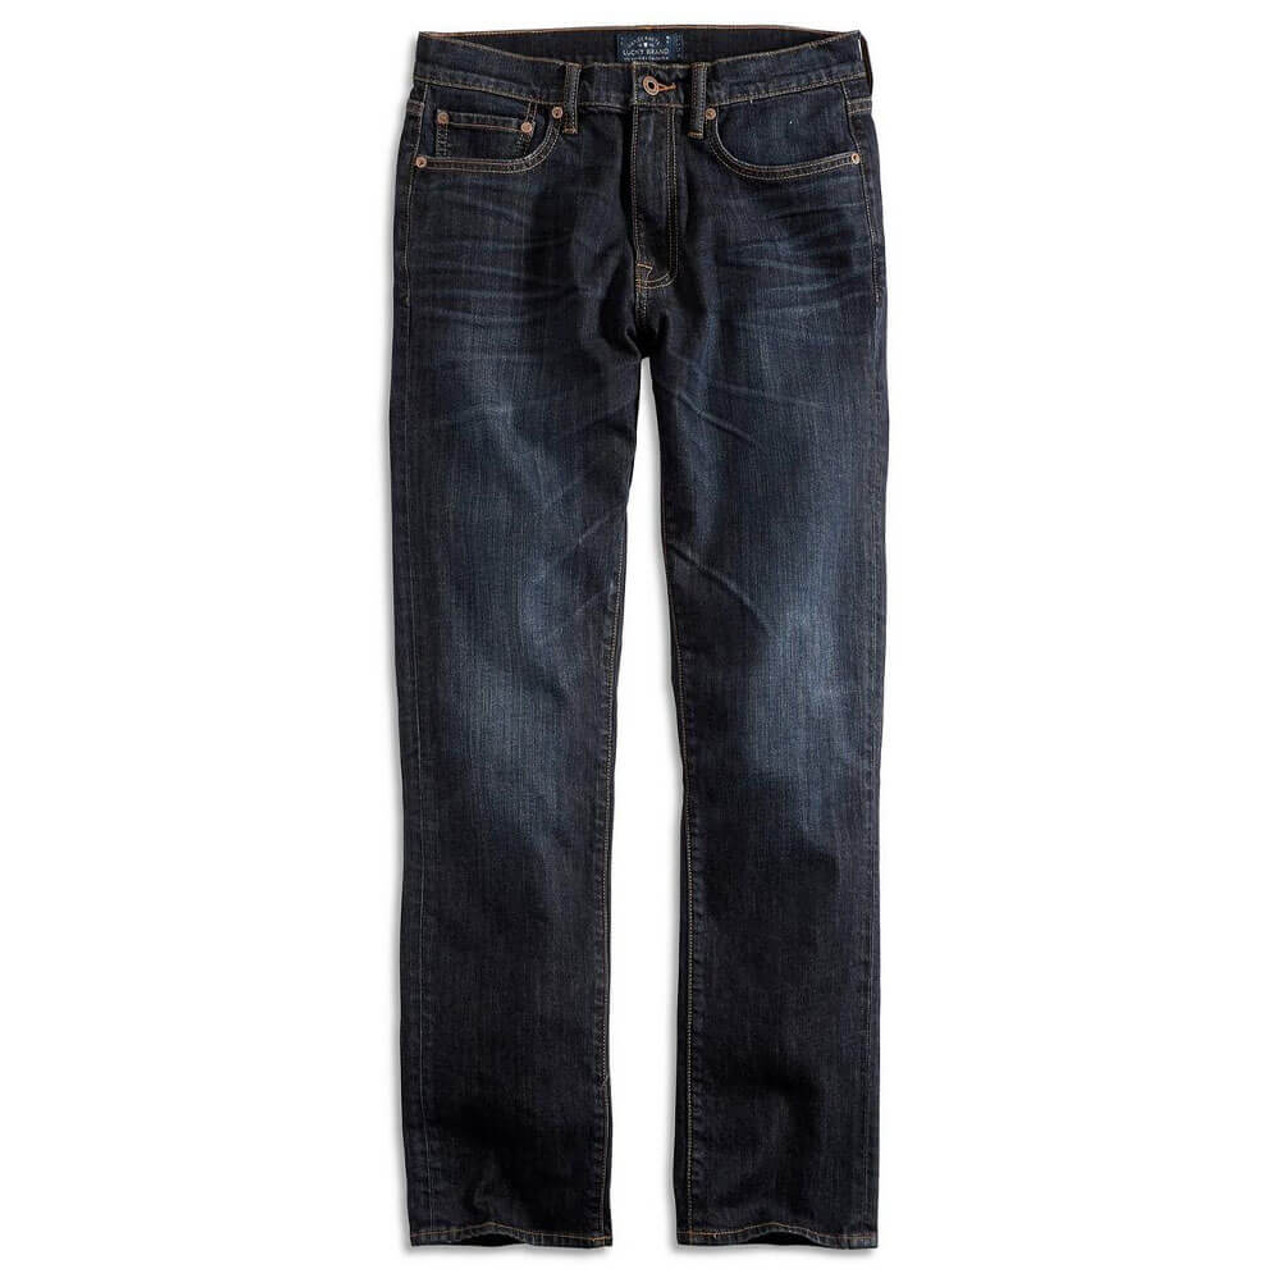 Lucky Brand 410 Athletic Jeans for Men for sale